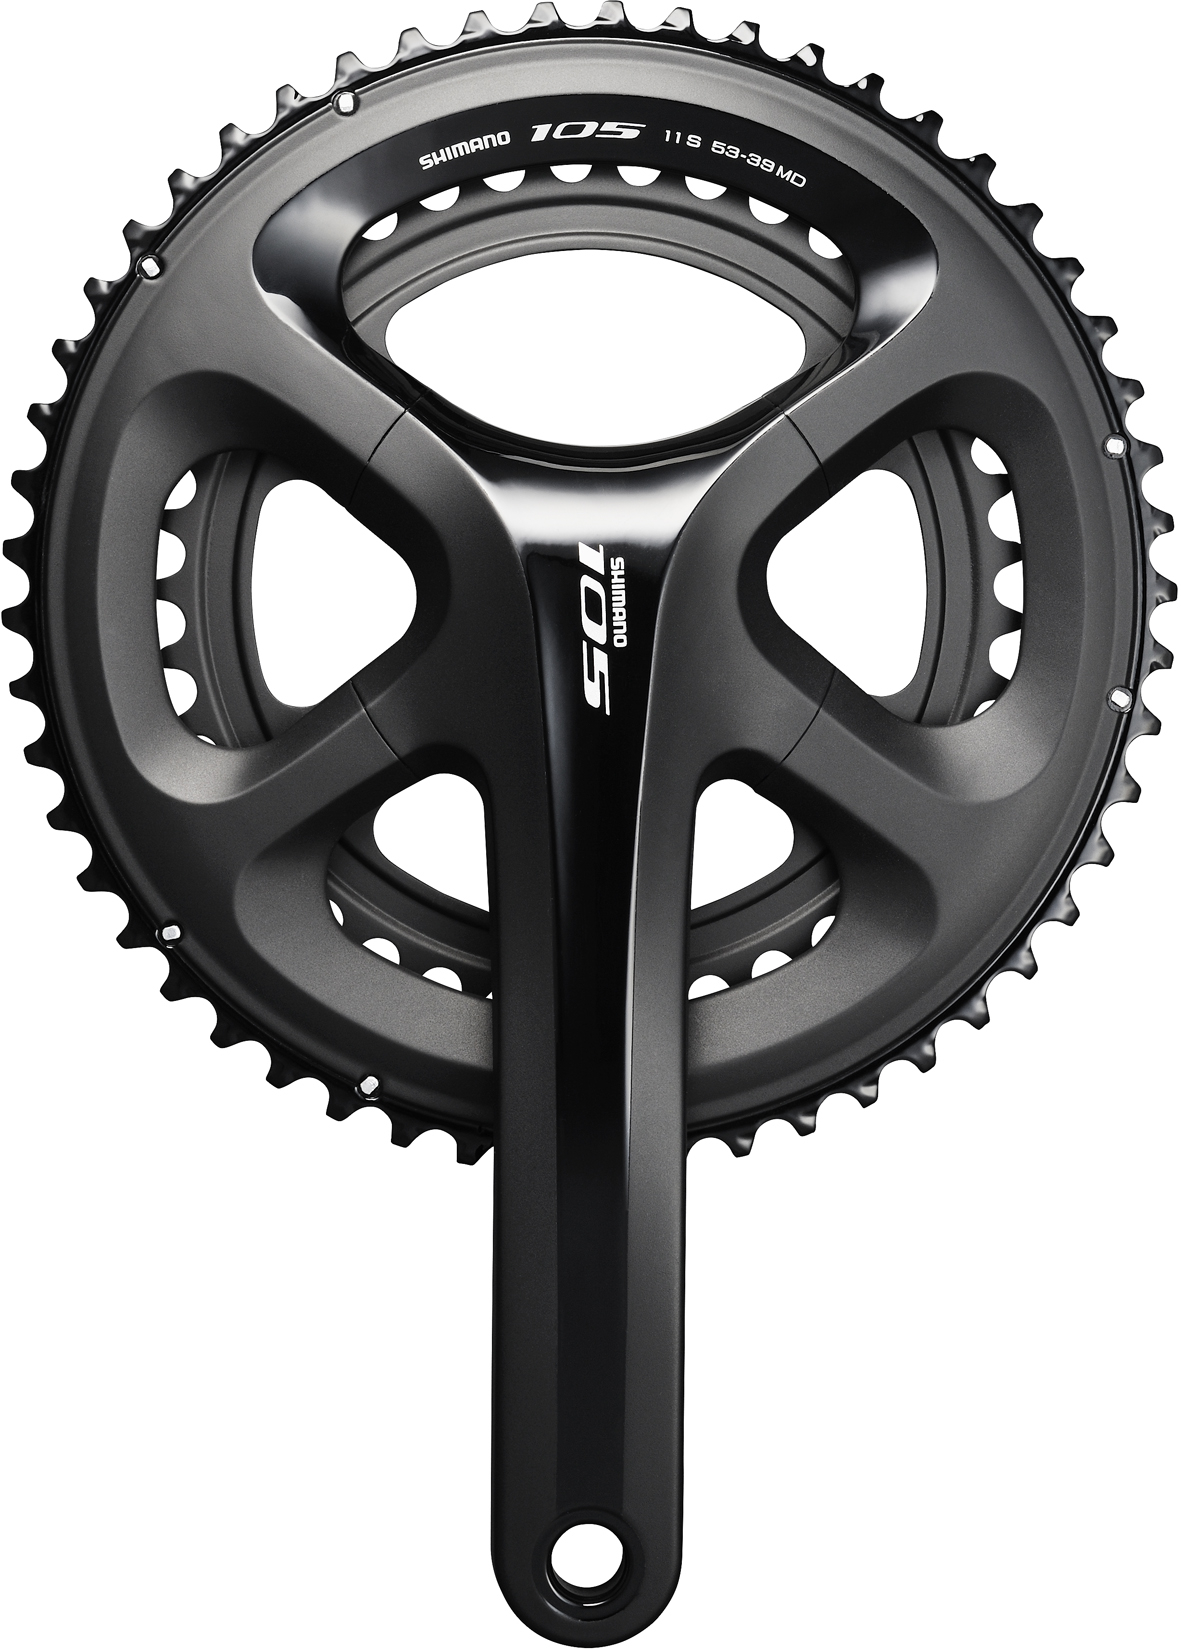 Schadelijk opgroeien Fascinerend Shimano FC-5800 105 Compact chainset - The Bicycle Chain